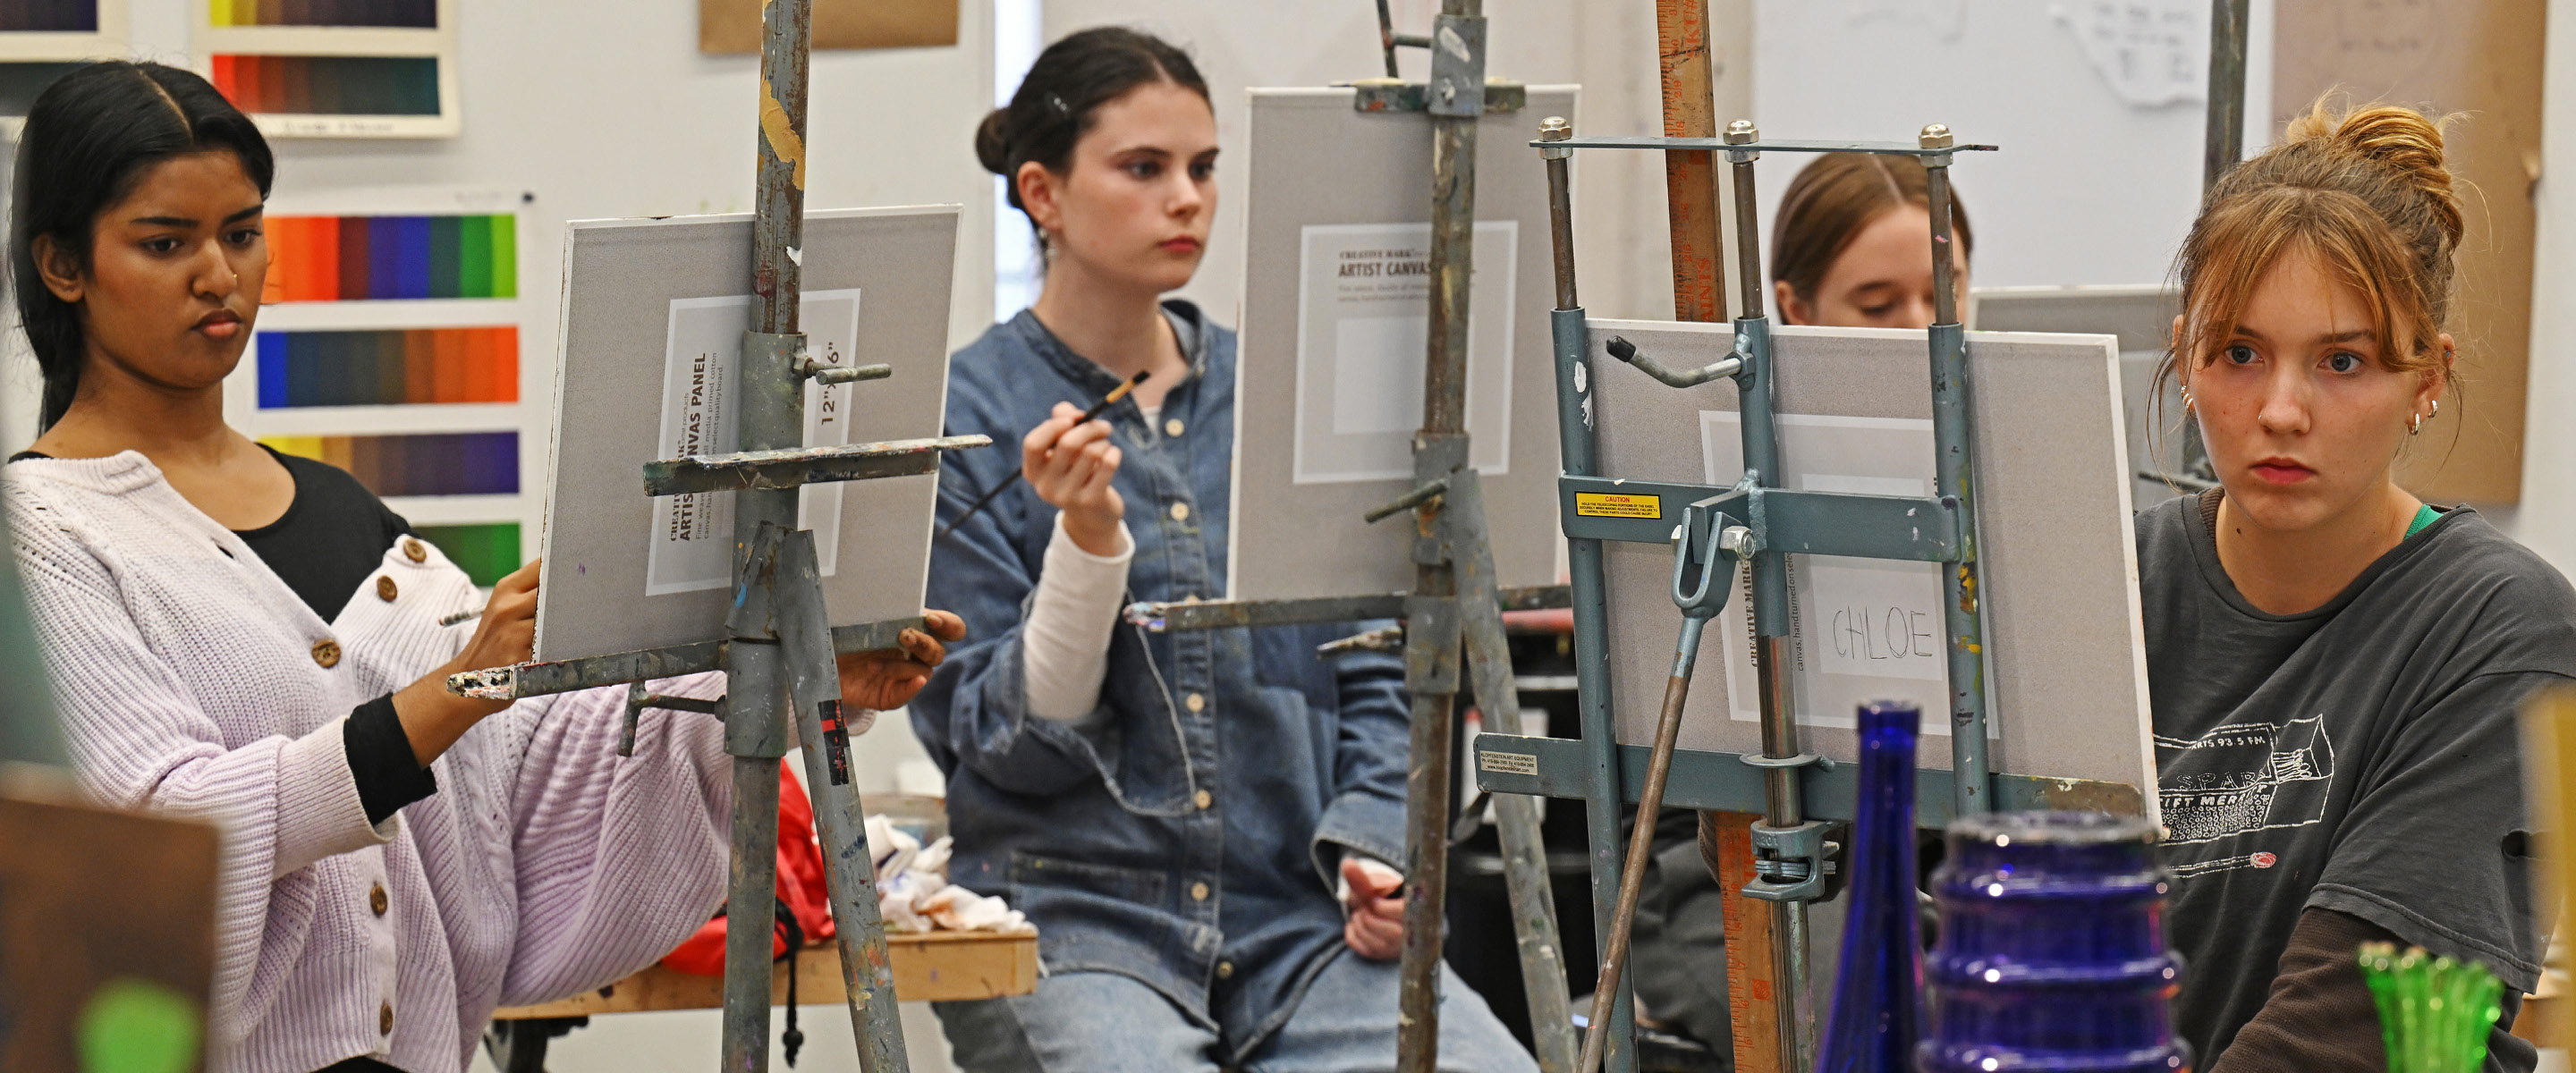 Students painting at easels